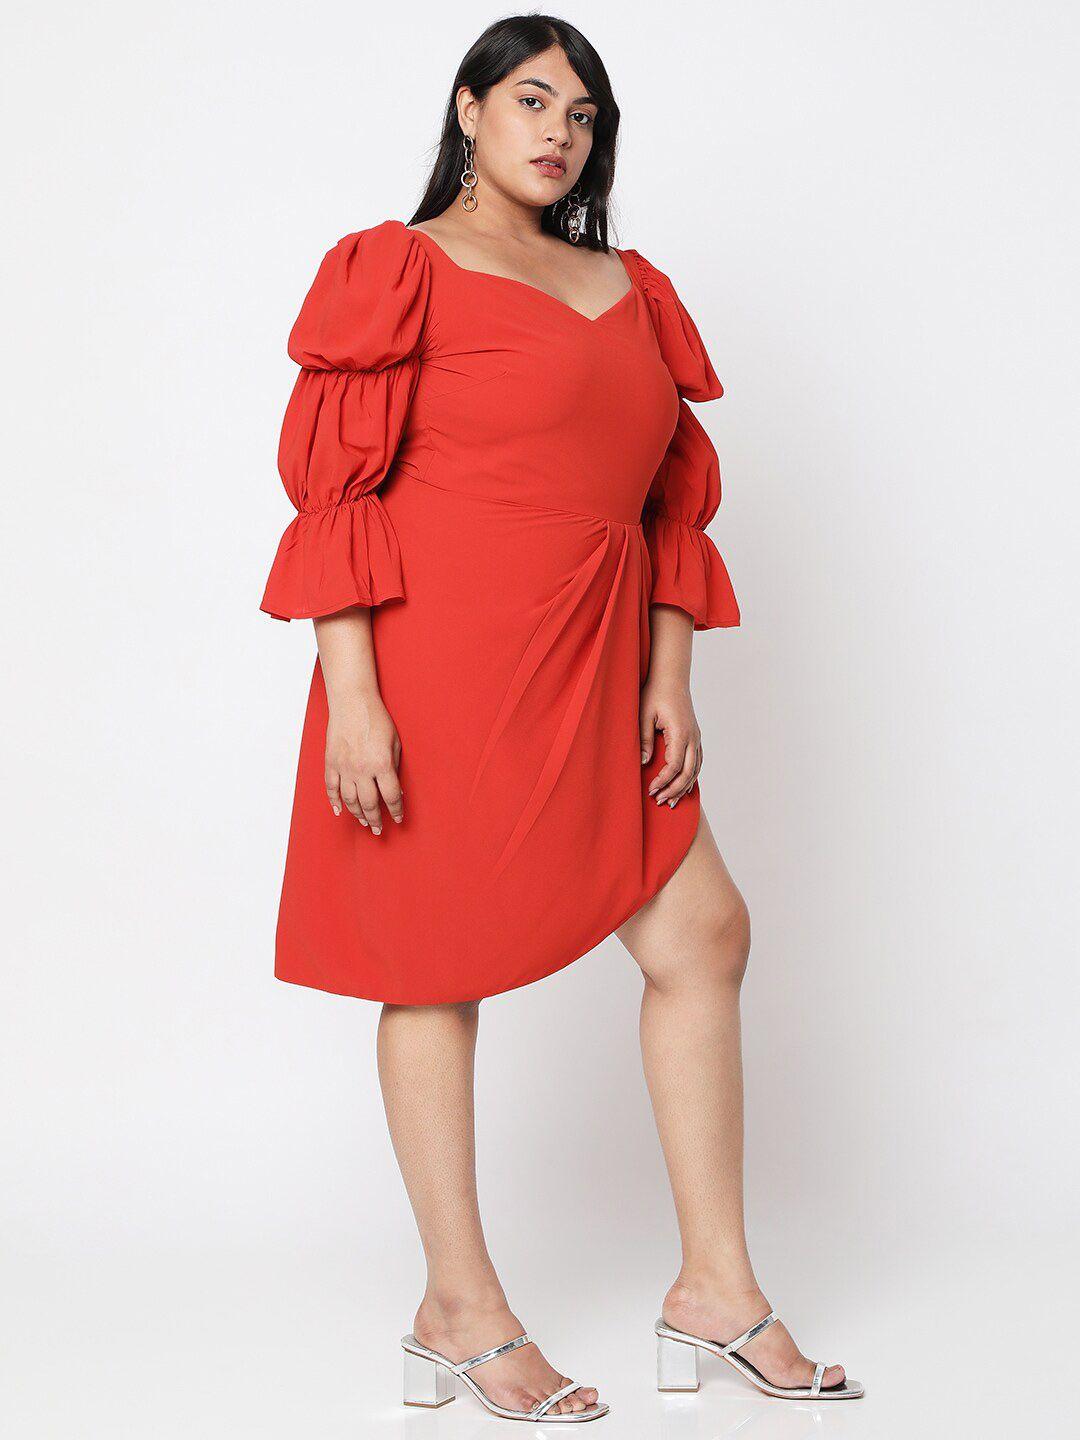 curves by mish rust plus size georgette dress